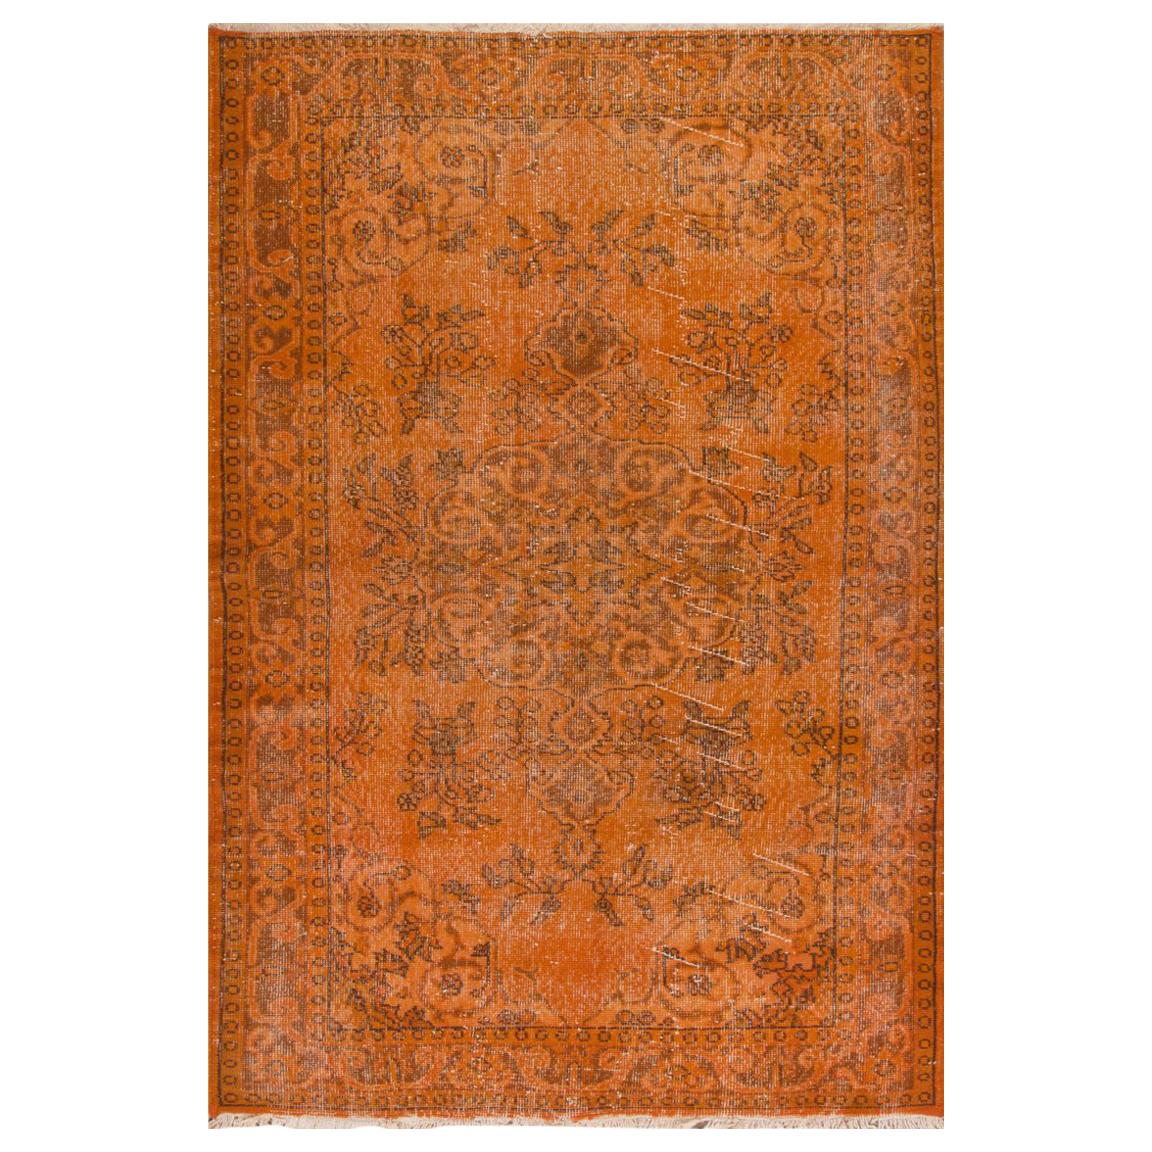 4x7.3 Ft Contemporary Vintage Wool Rug Re-Dyed in Orange, Handknotted in Turkey